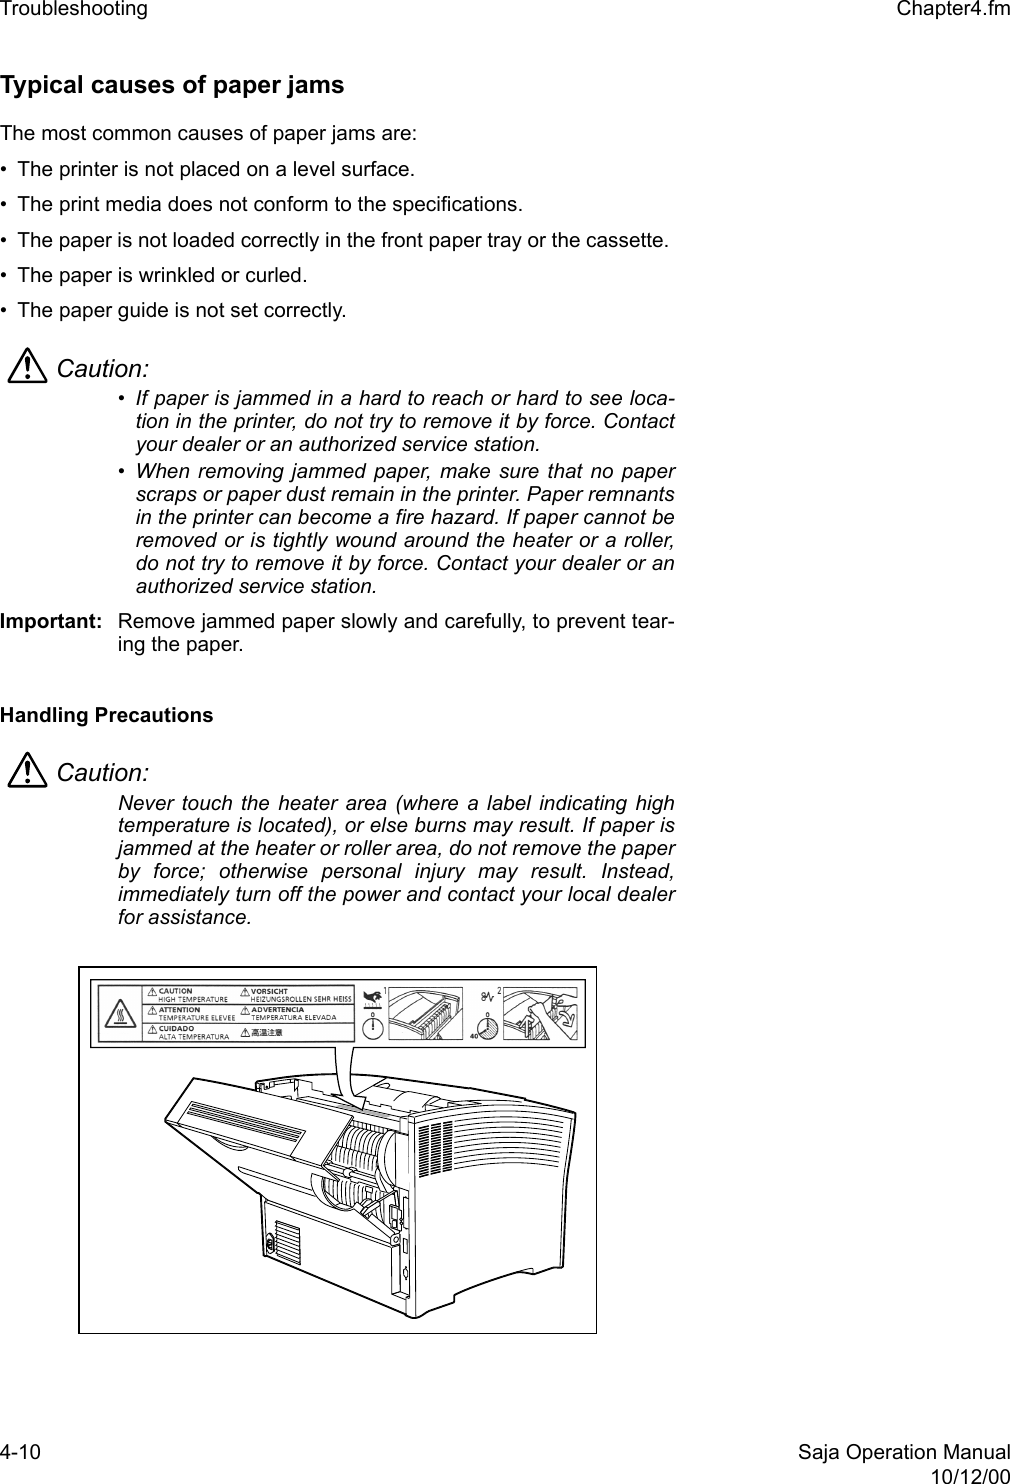 4-10 Saja Operation Manual10/12/00Troubleshooting  Chapter4.fmTypical causes of paper jams The most common causes of paper jams are: • The printer is not placed on a level surface. • The print media does not conform to the specifications. • The paper is not loaded correctly in the front paper tray or the cassette. • The paper is wrinkled or curled. • The paper guide is not set correctly.Caution: • If paper is jammed in a hard to reach or hard to see loca-tion in the printer, do not try to remove it by force. Contactyour dealer or an authorized service station. • When removing jammed paper, make sure that no paperscraps or paper dust remain in the printer. Paper remnantsin the printer can become a fire hazard. If paper cannot beremoved or is tightly wound around the heater or a roller,do not try to remove it by force. Contact your dealer or anauthorized service station. Important: Remove jammed paper slowly and carefully, to prevent tear-ing the paper. Handling Precautions Caution: Never touch the heater area (where a label indicating hightemperature is located), or else burns may result. If paper isjammed at the heater or roller area, do not remove the paperby force; otherwise personal injury may result. Instead,immediately turn off the power and contact your local dealerfor assistance.